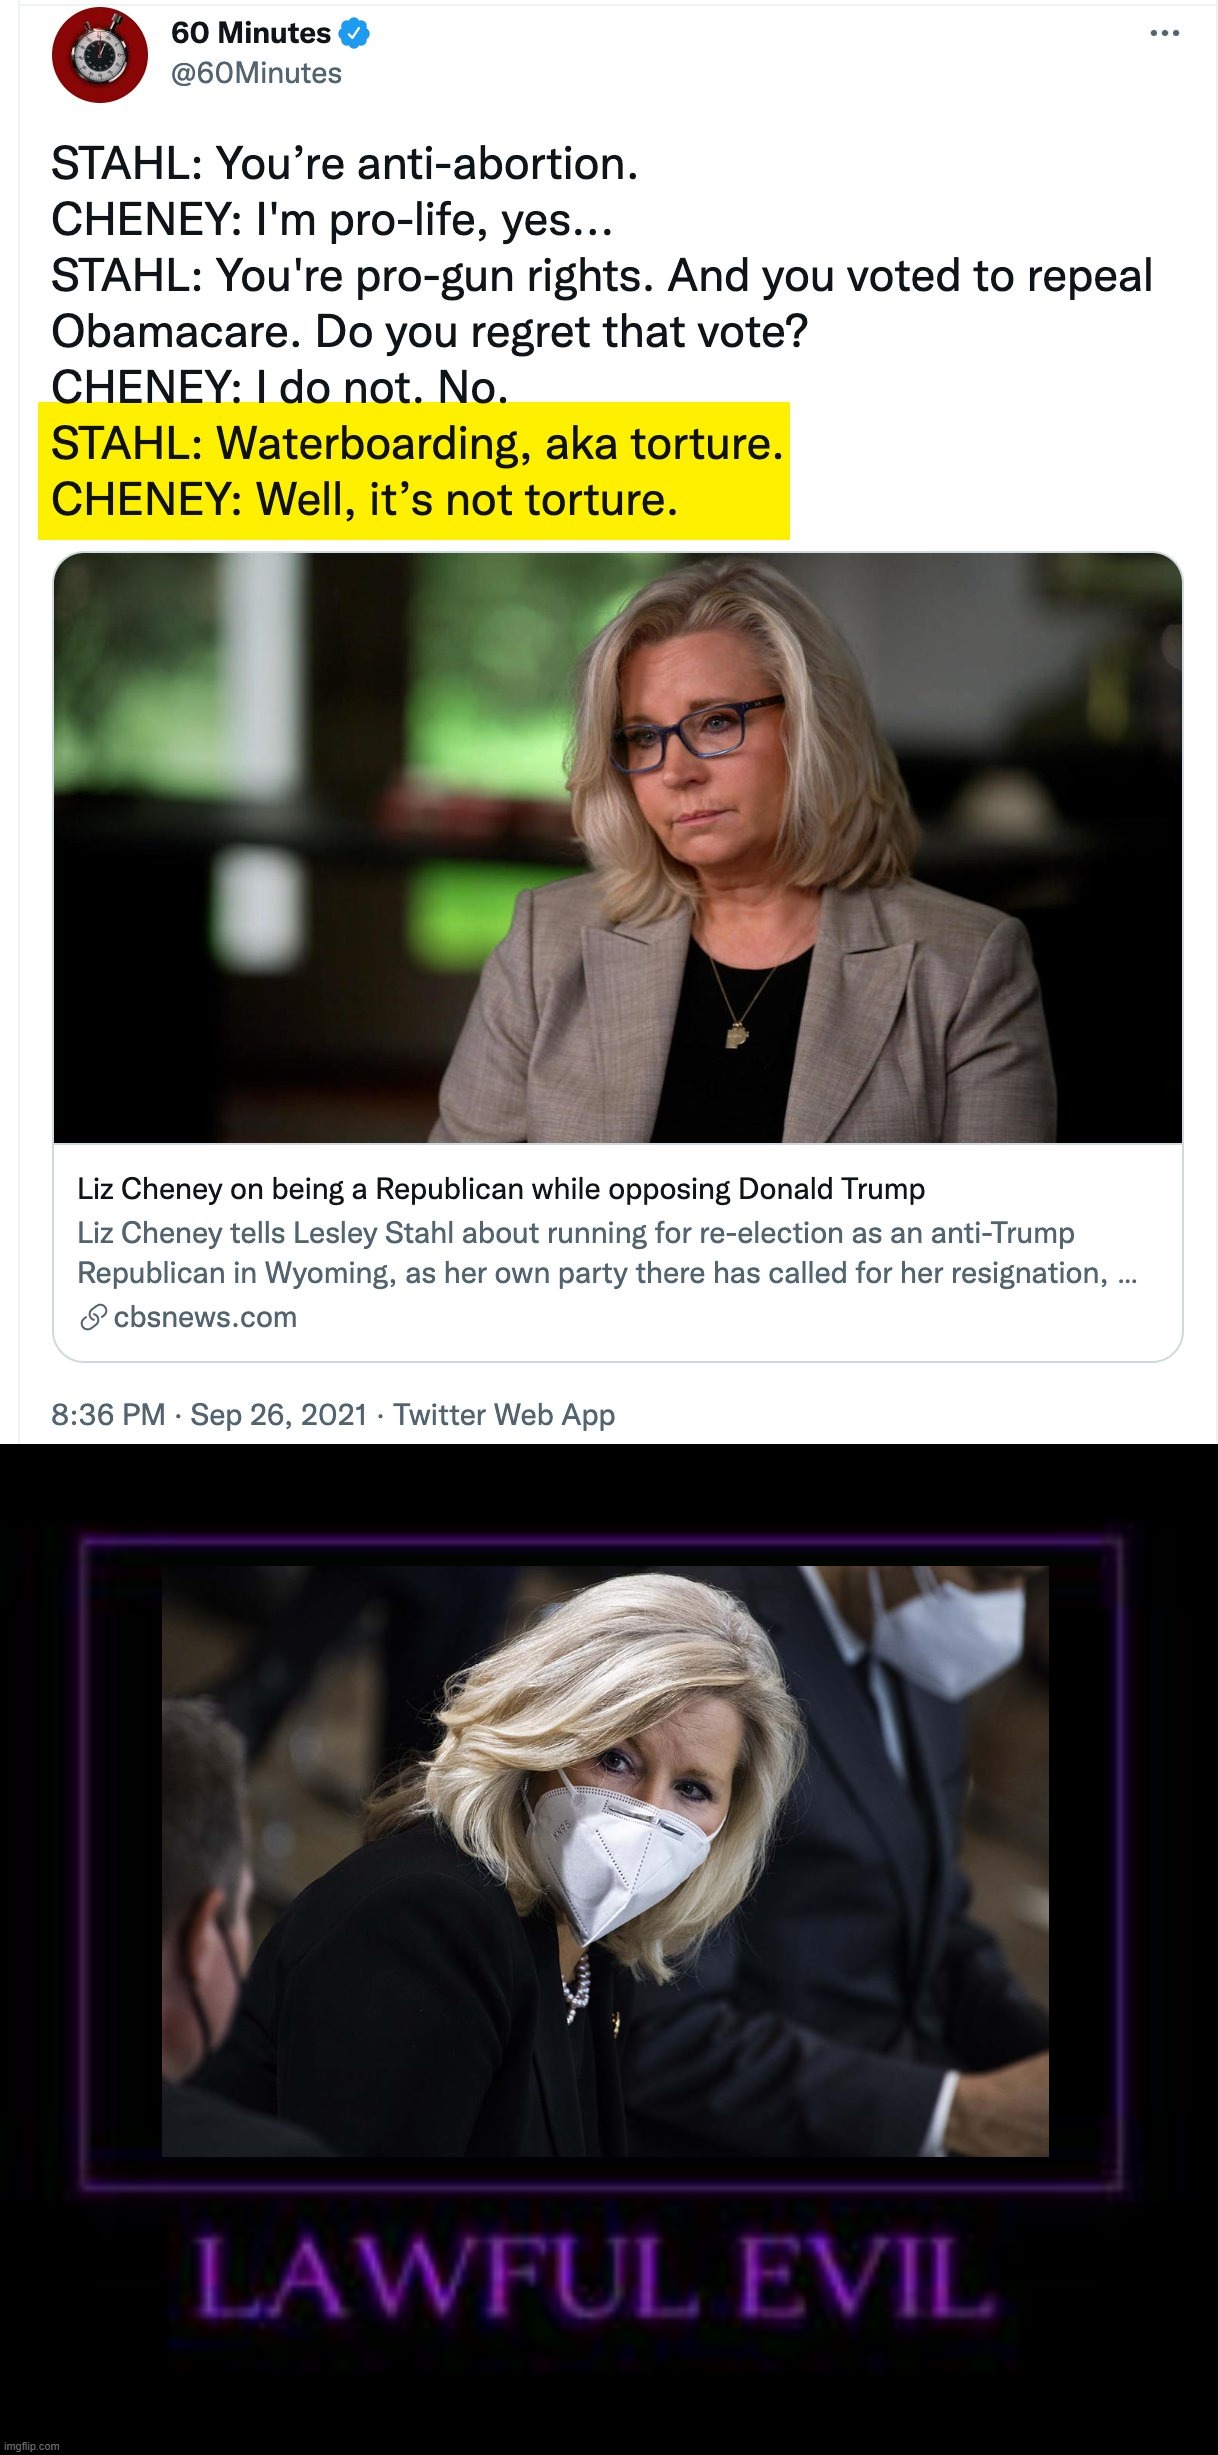 Liz Cheney: Lawful Evil Confirmed | image tagged in liz cheney 60 minutes interview,alignment chart,liz cheney,lawful,evil,confirmed | made w/ Imgflip meme maker